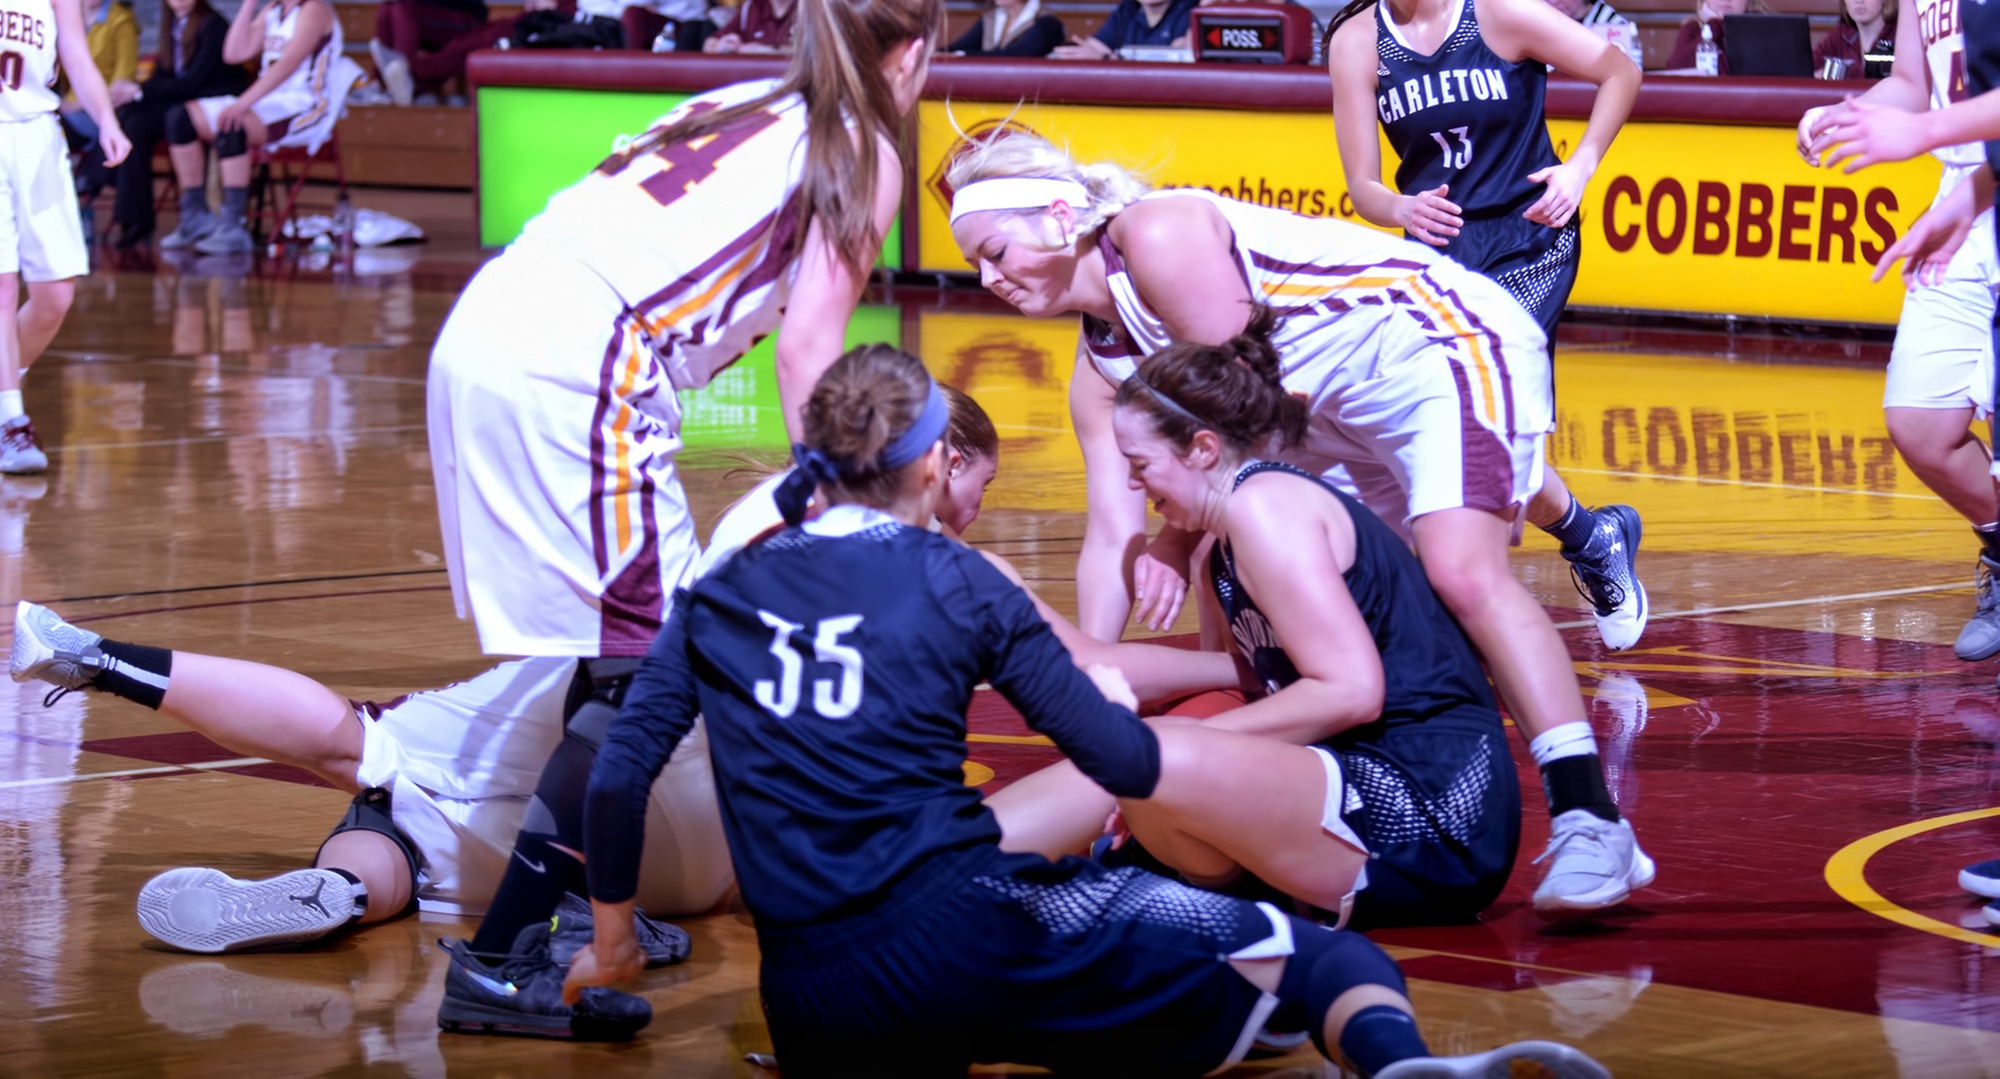 Players scramble to get control of the ball during the second quarter of the Cobbers' game with Carleton.